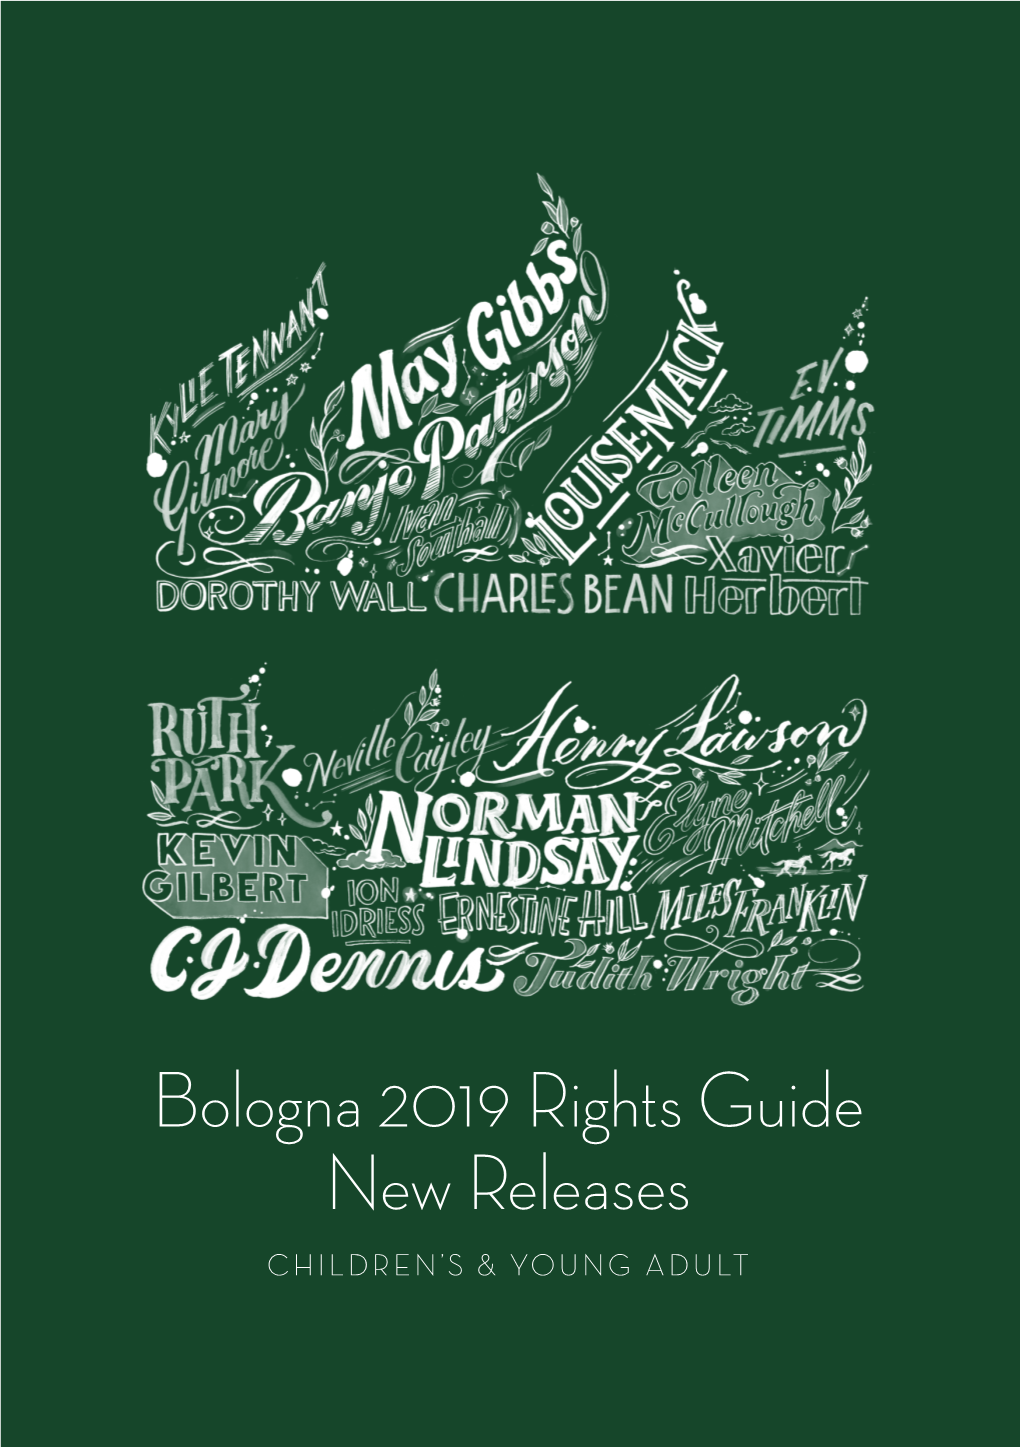 Bologna 2019 Rights Guide New Releases CHILDREN’S & YOUNG ADULT CONTENTS